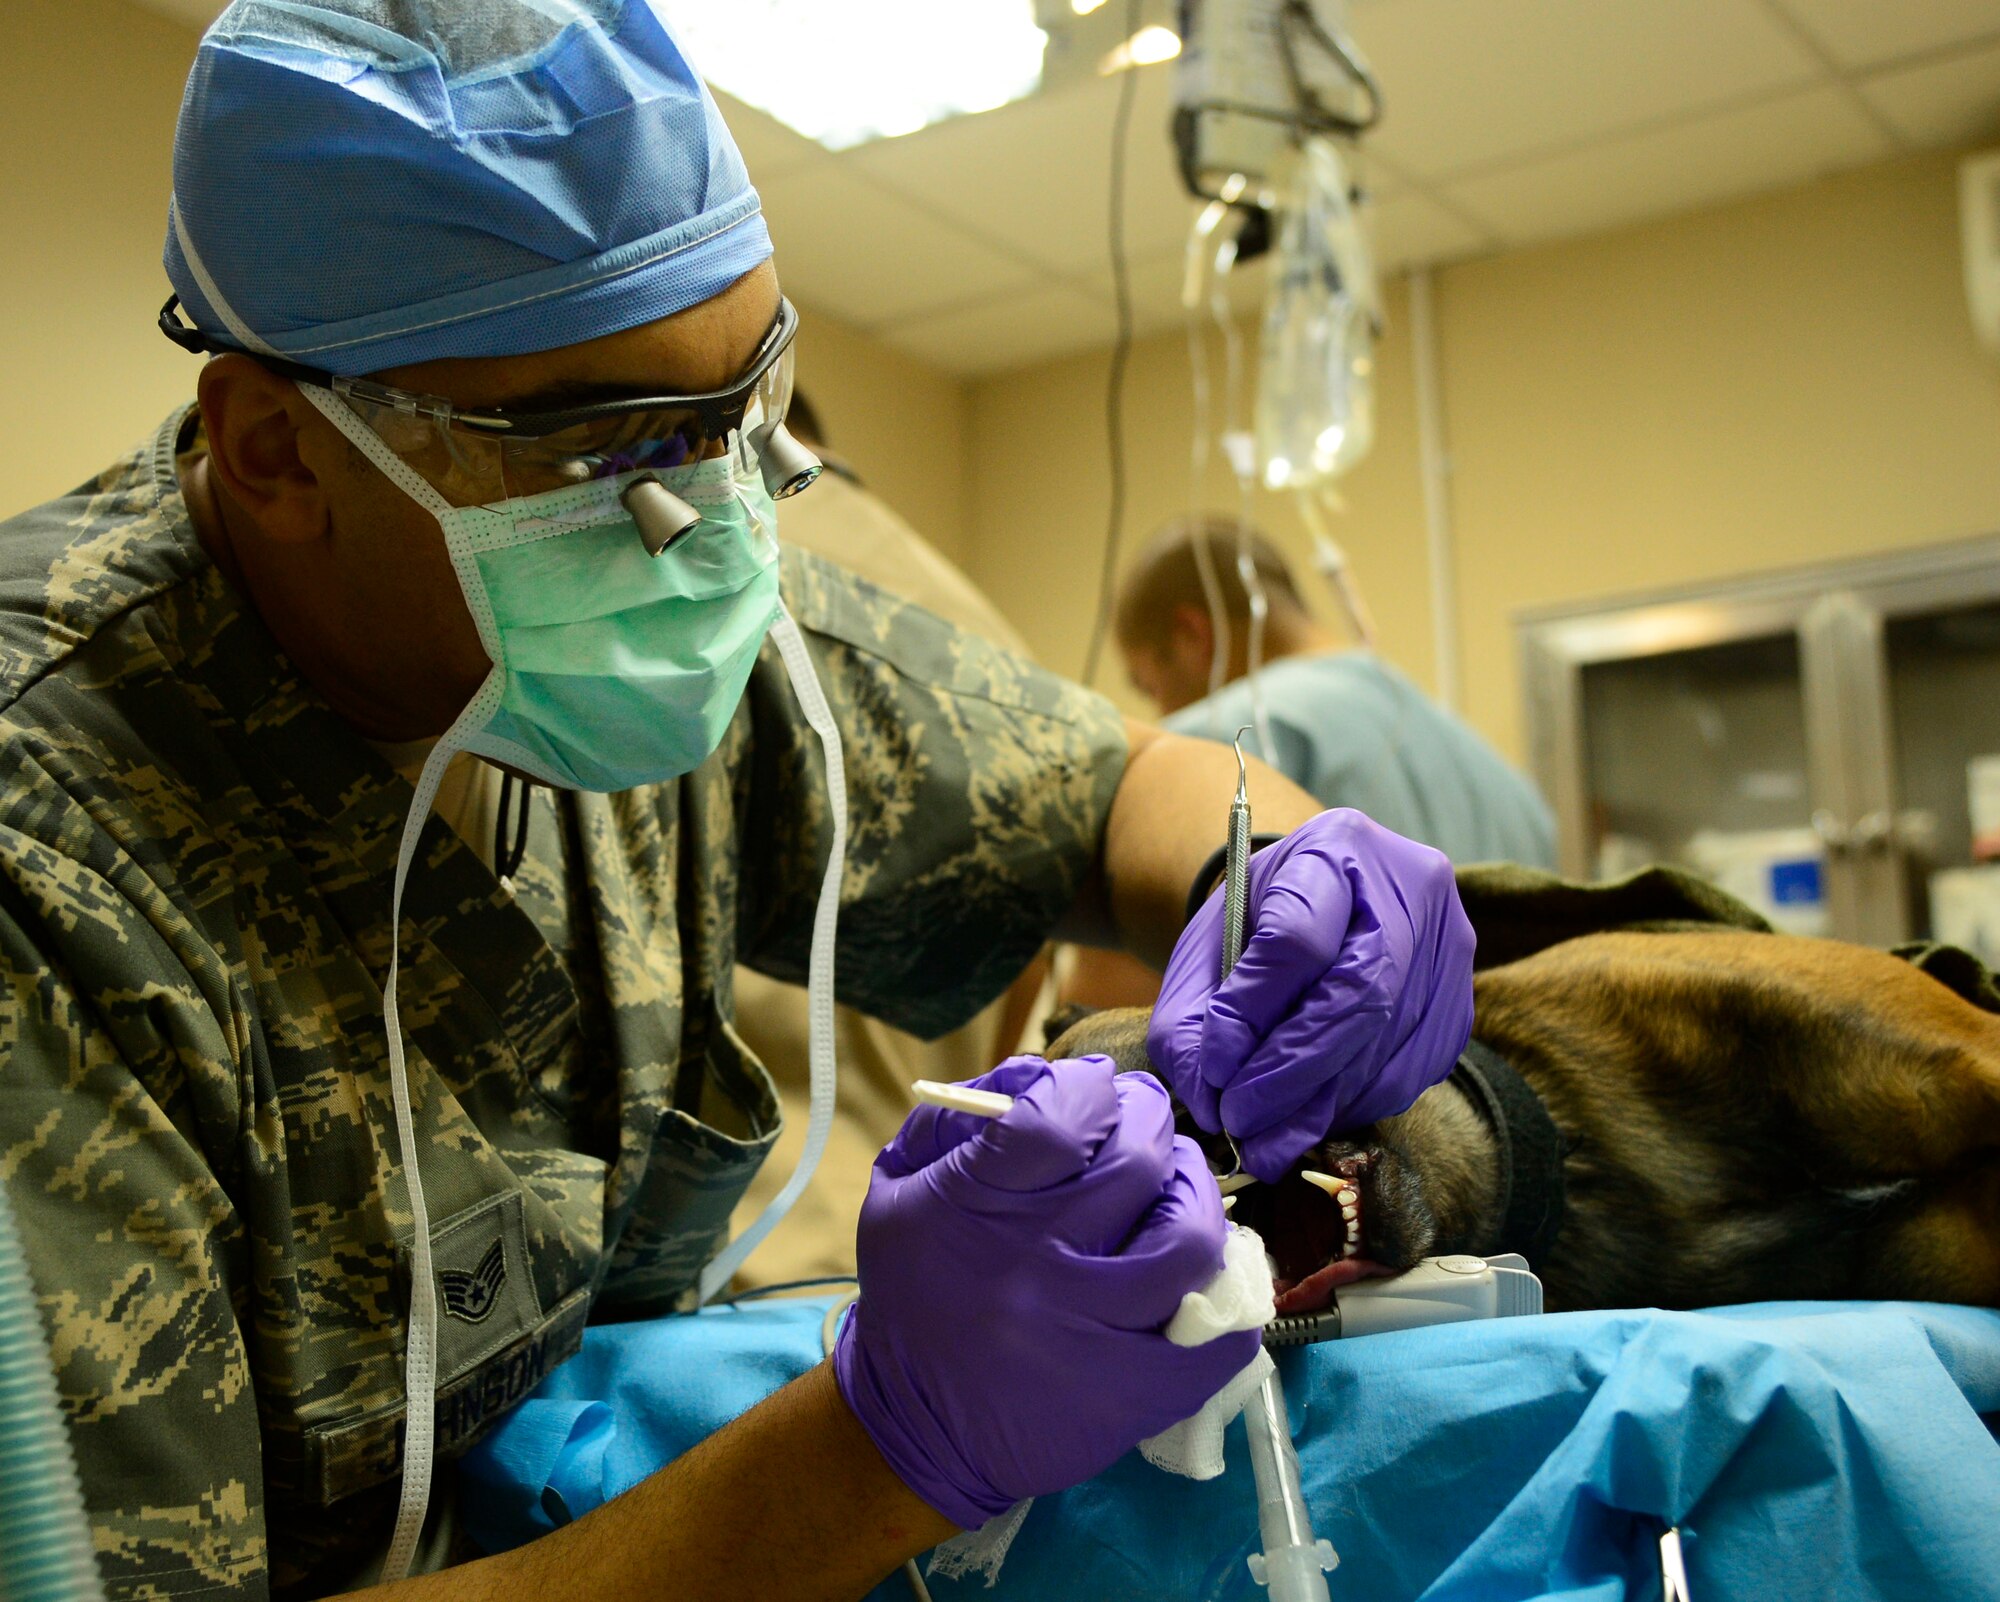 U.S. Air Force Staff Sgt. Gregory Johnson, 386th Expeditionary Medical Support Squadron, removes plaque from 386th Expeditionary Security Forces Squadron Military Working Dog, FFrida’s teeth during a dental cleaning at an undisclosed location in Southwest Asia Aug. 27, 2015. MWDs receive routine medical care to aid their human military partners in the fight against the Islamic State or ISIL. (U.S. Air Force photo by Senior Airman Racheal E. Watson/Released)